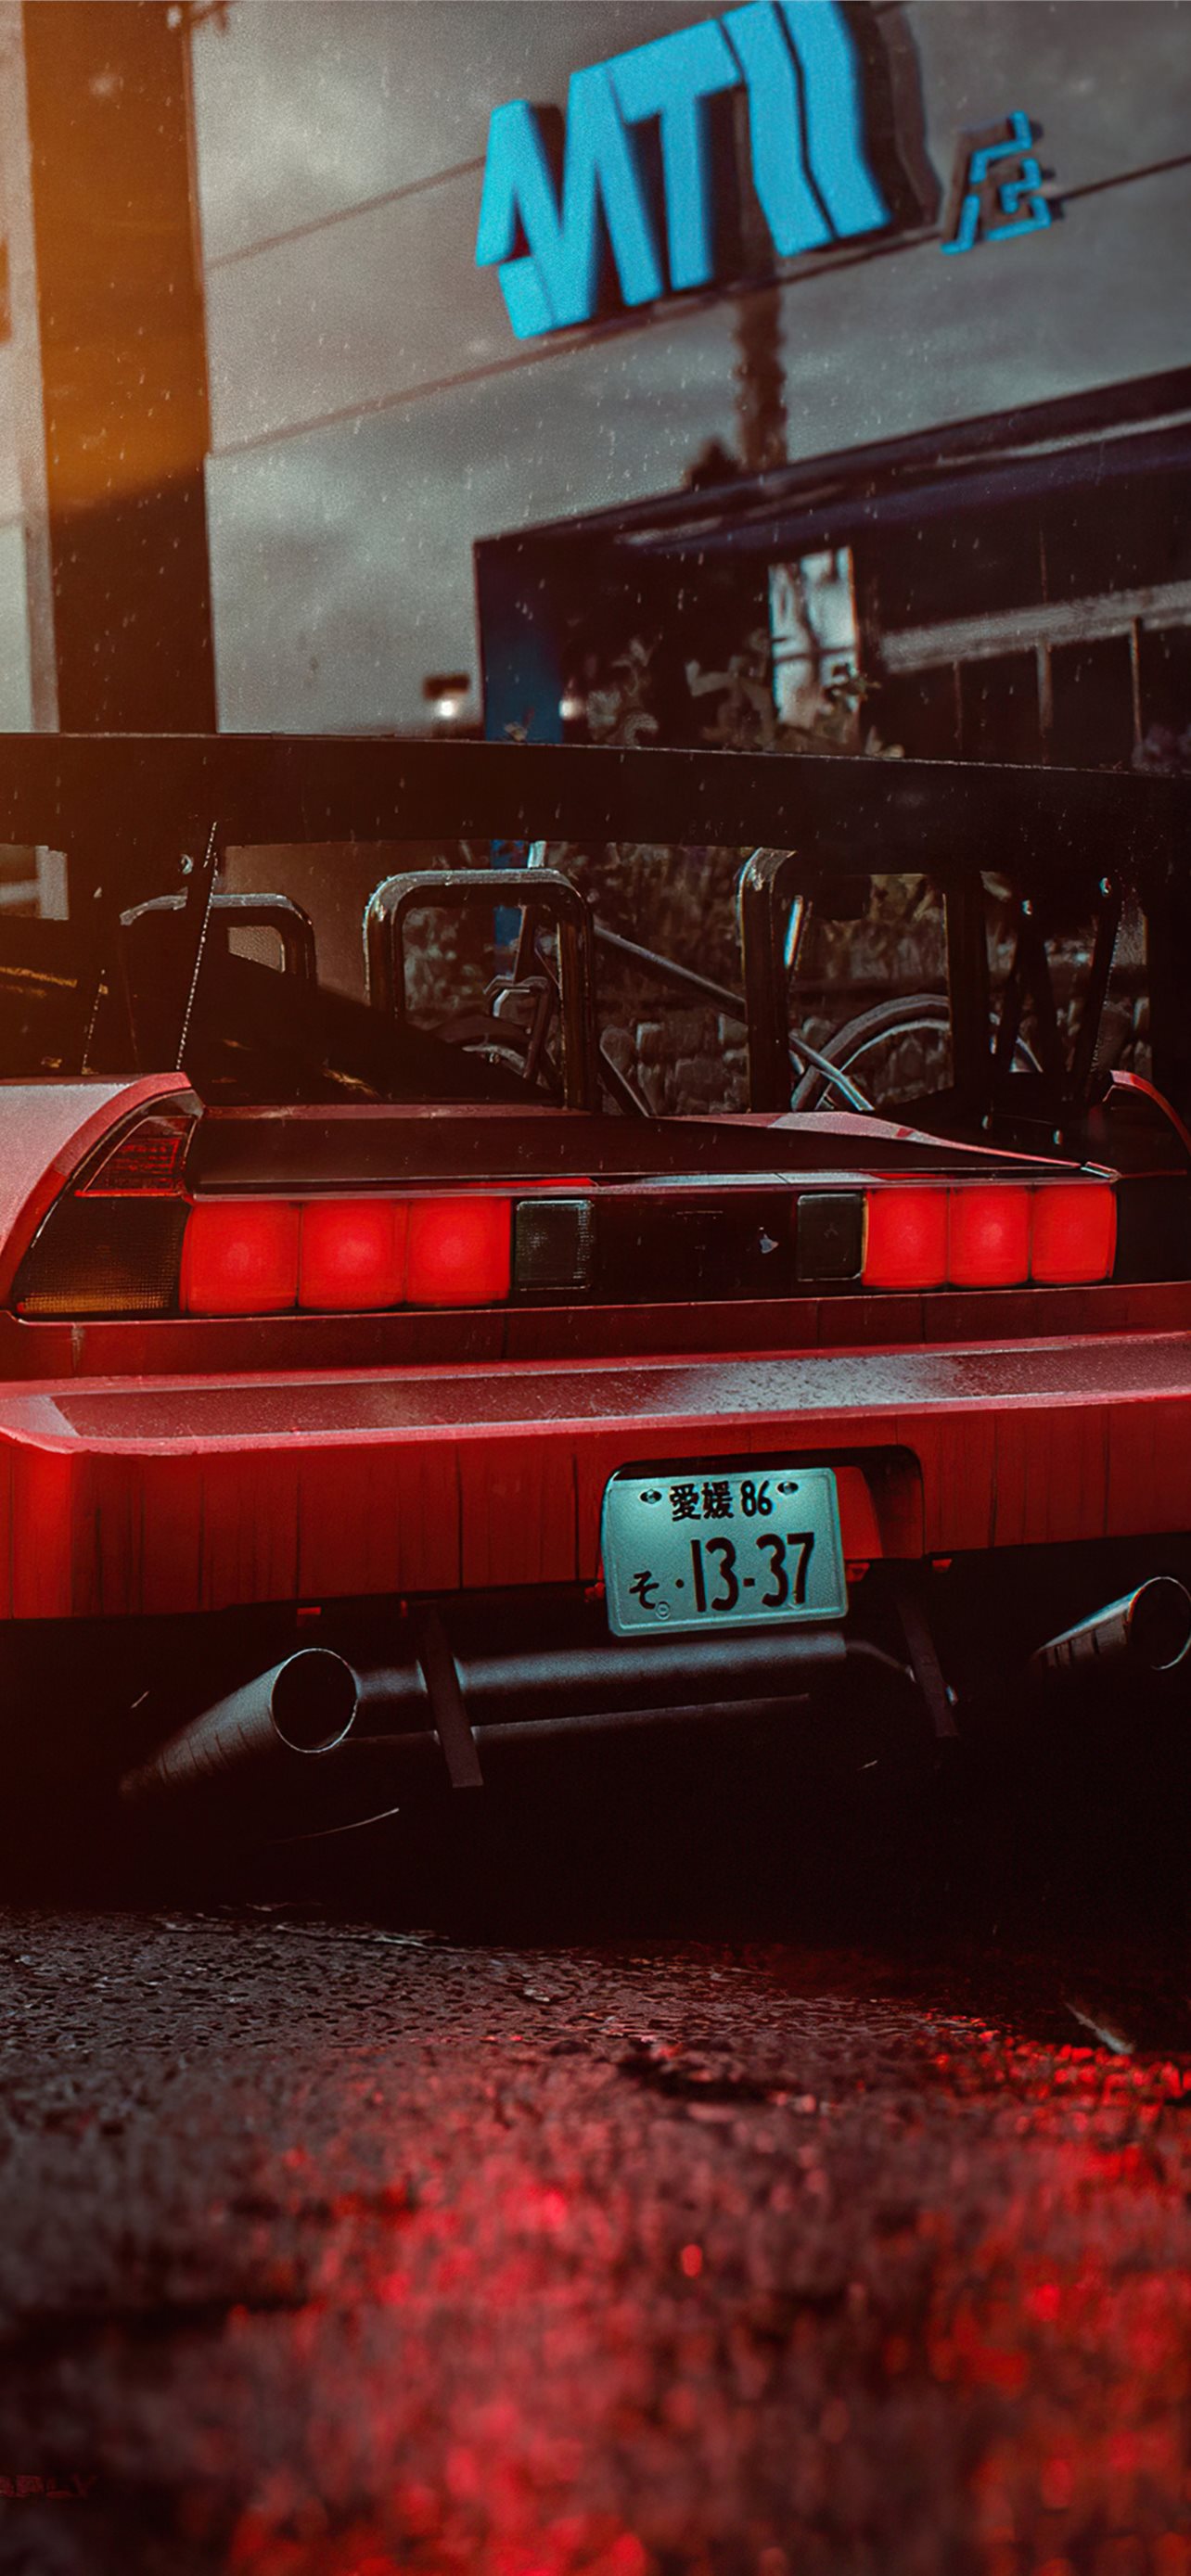 Great NSX phone wallpaper if upload goes well  rJDM